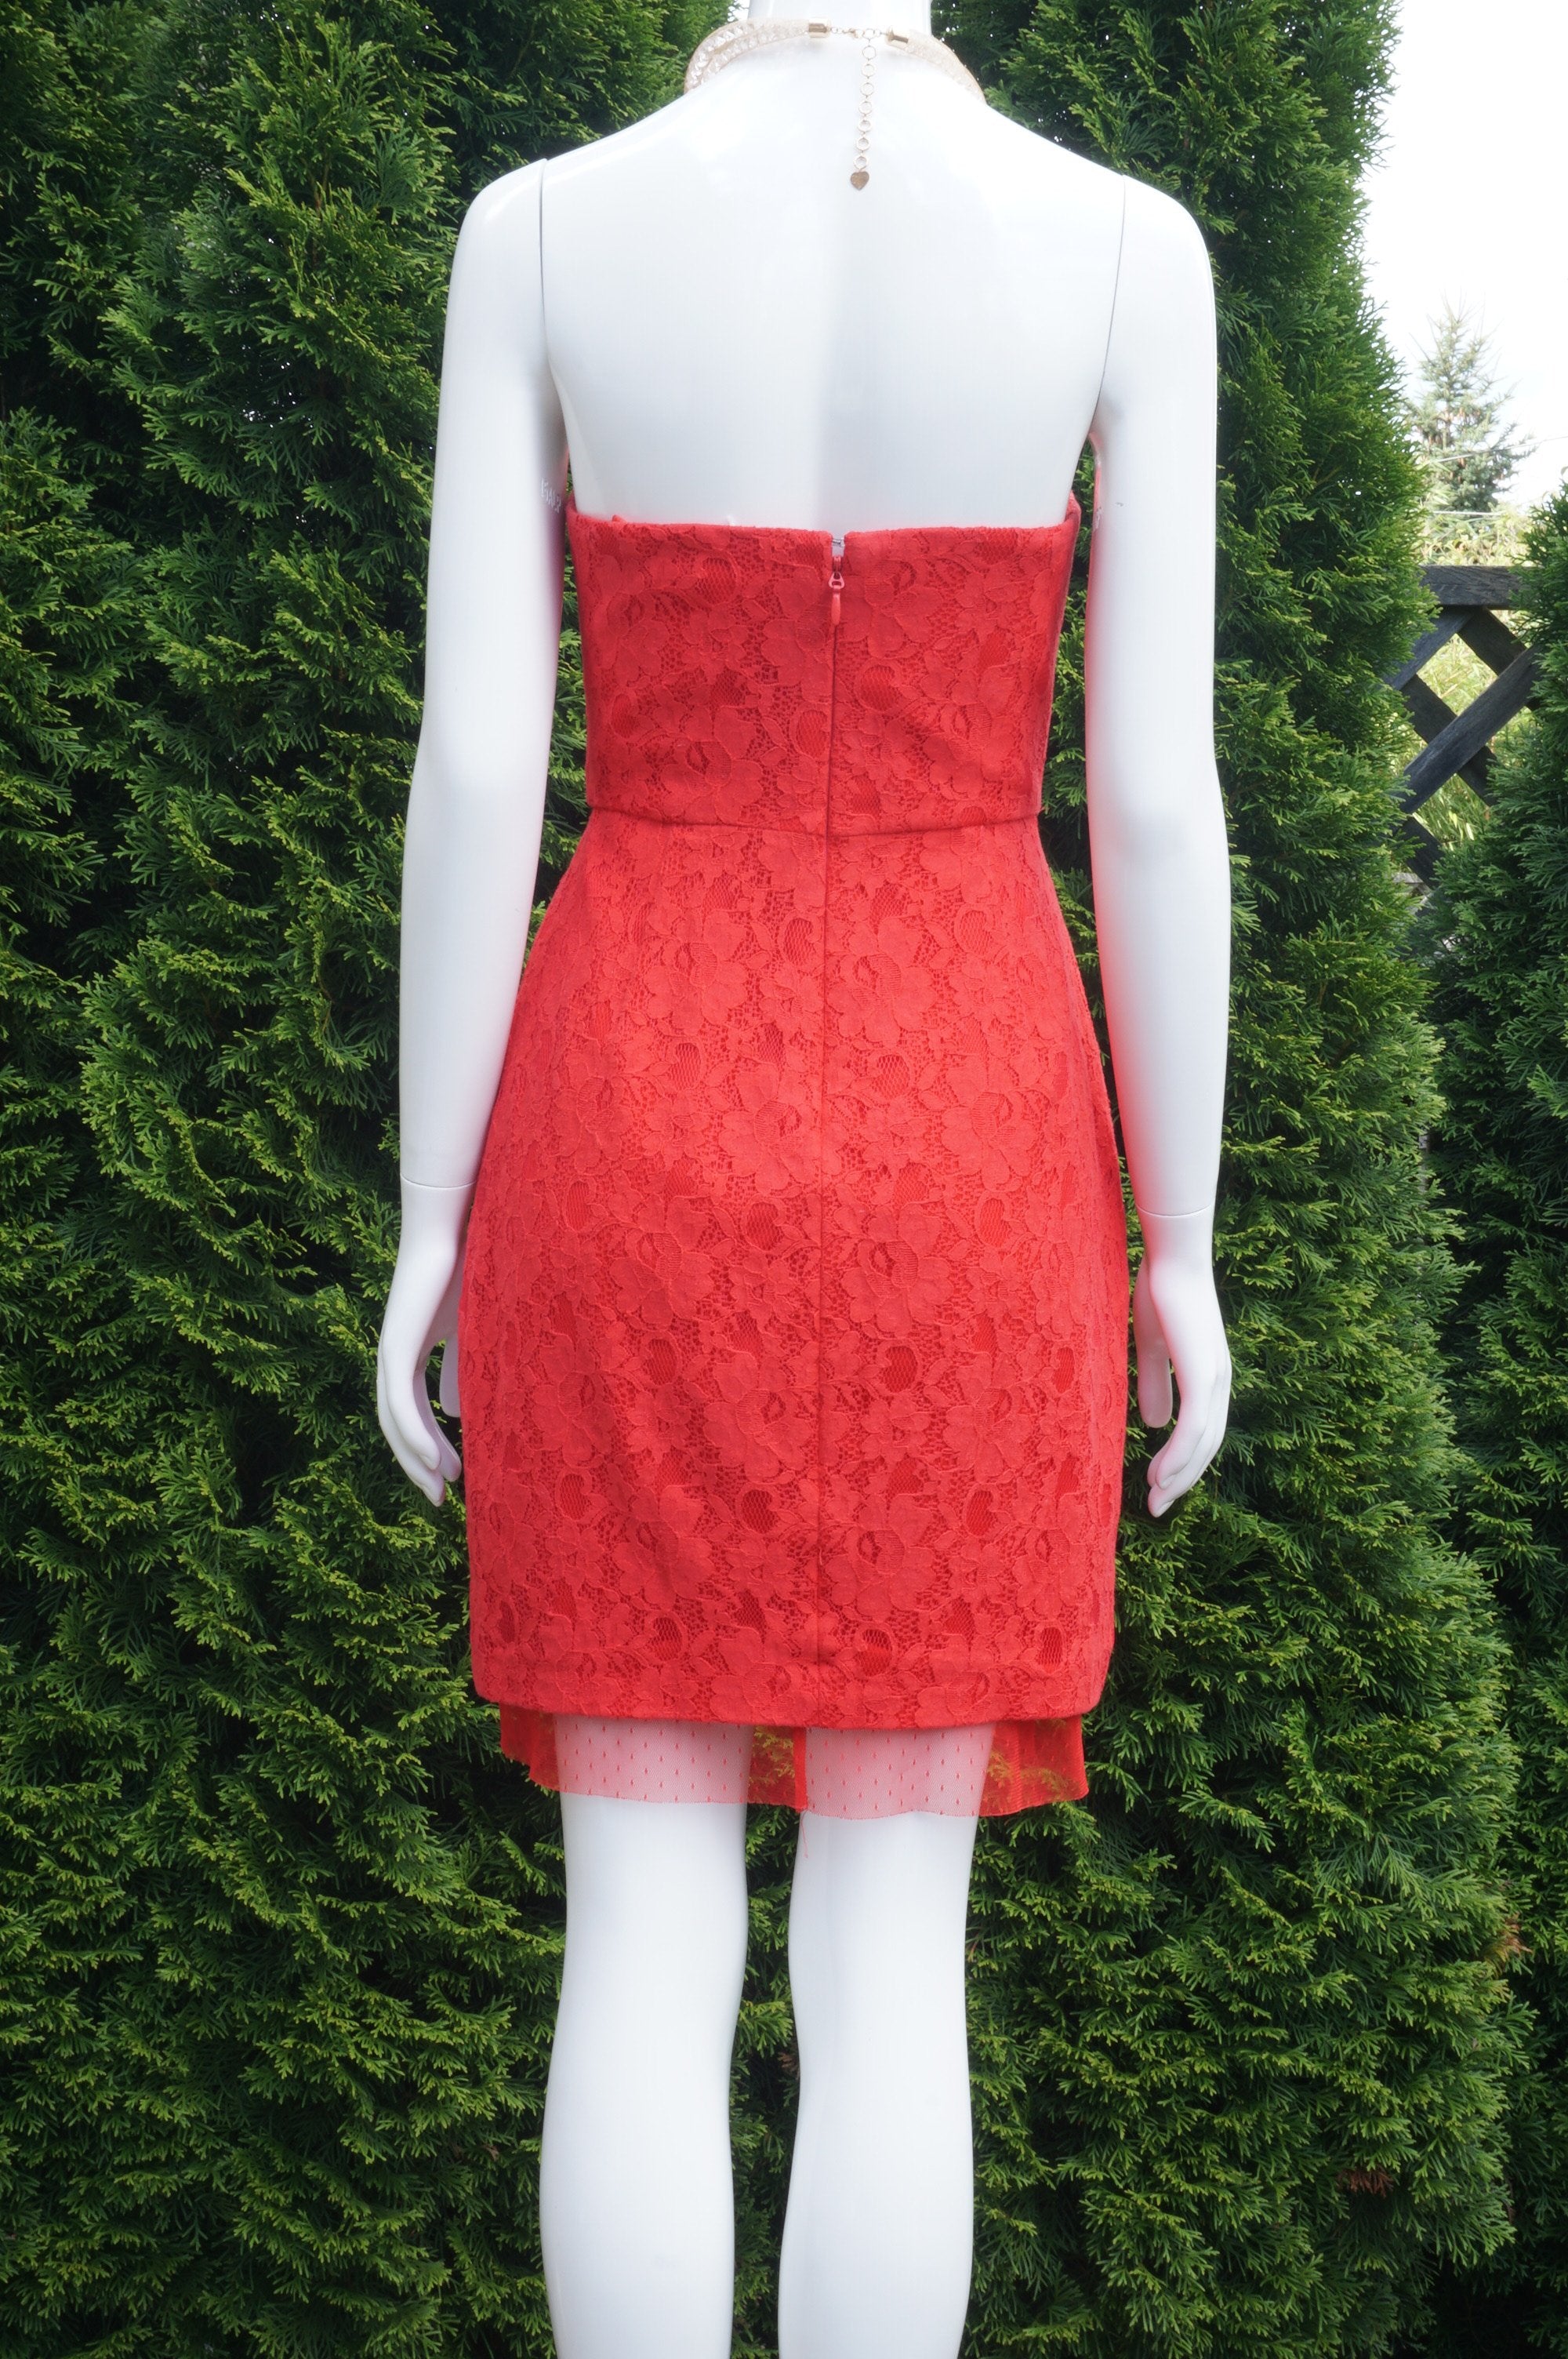 BCBGMAXAZRIA Red Lace Strapless Mini Dress,  Bust 33 inches, waist 26 inches, length 30 inches. Sticky liner inside of bra cups for added security. Zipper in back., Red, Shell: 77% Cotton, 23% Nylon. Lining: 100% Polyester, women's Dresses & Rompers, women's Red Dresses & Rompers, BCBGMAXAZRIA women's Dresses & Rompers, Mini dress, lace dress, strapless dress, cocktail dress